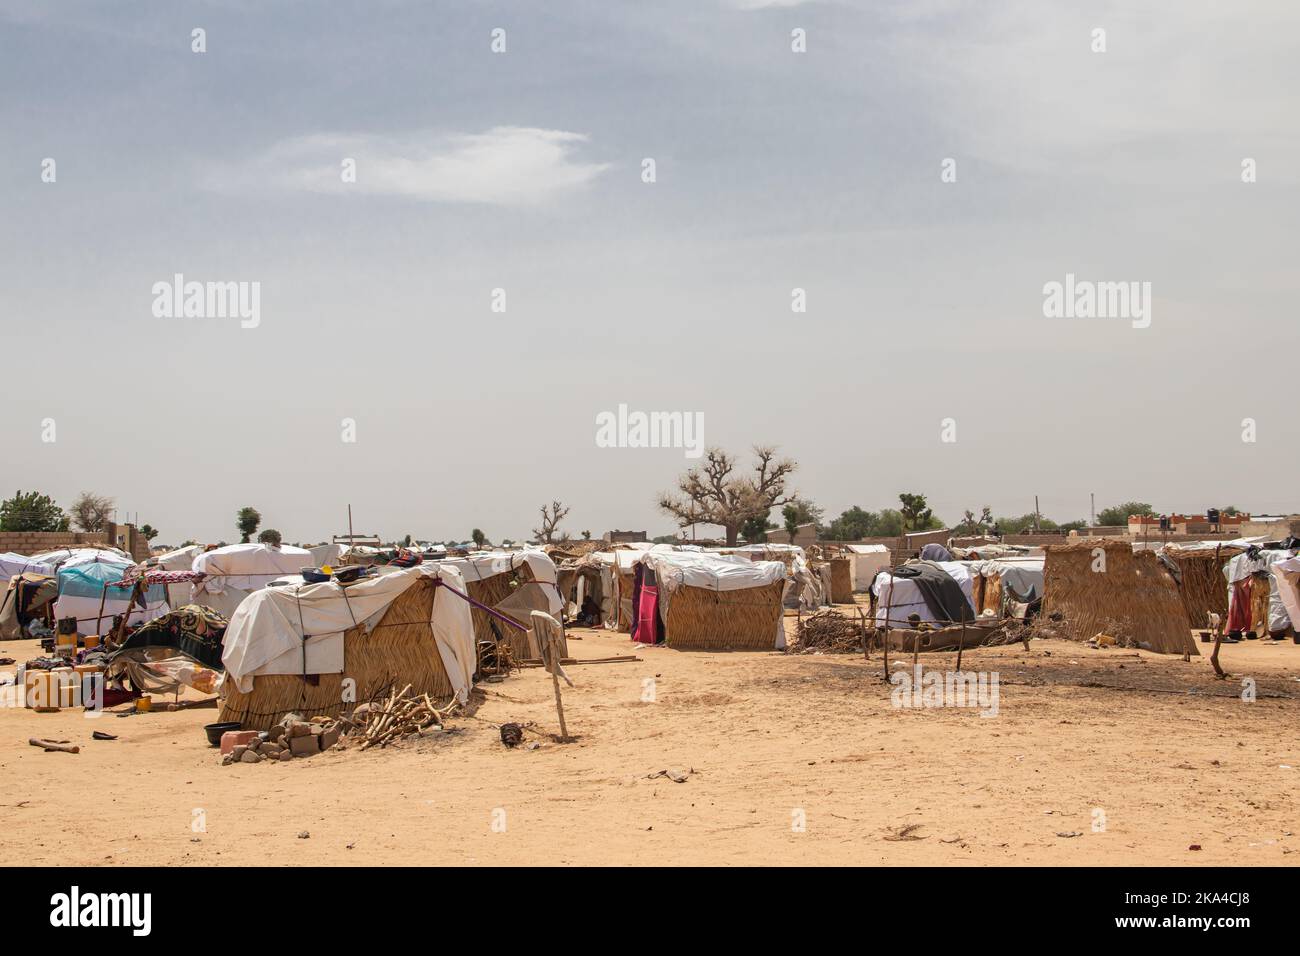 Refugee camp in Africa, full of people who took refuge due to insecurity and armed conflict. People living in very poor conditions Stock Photo